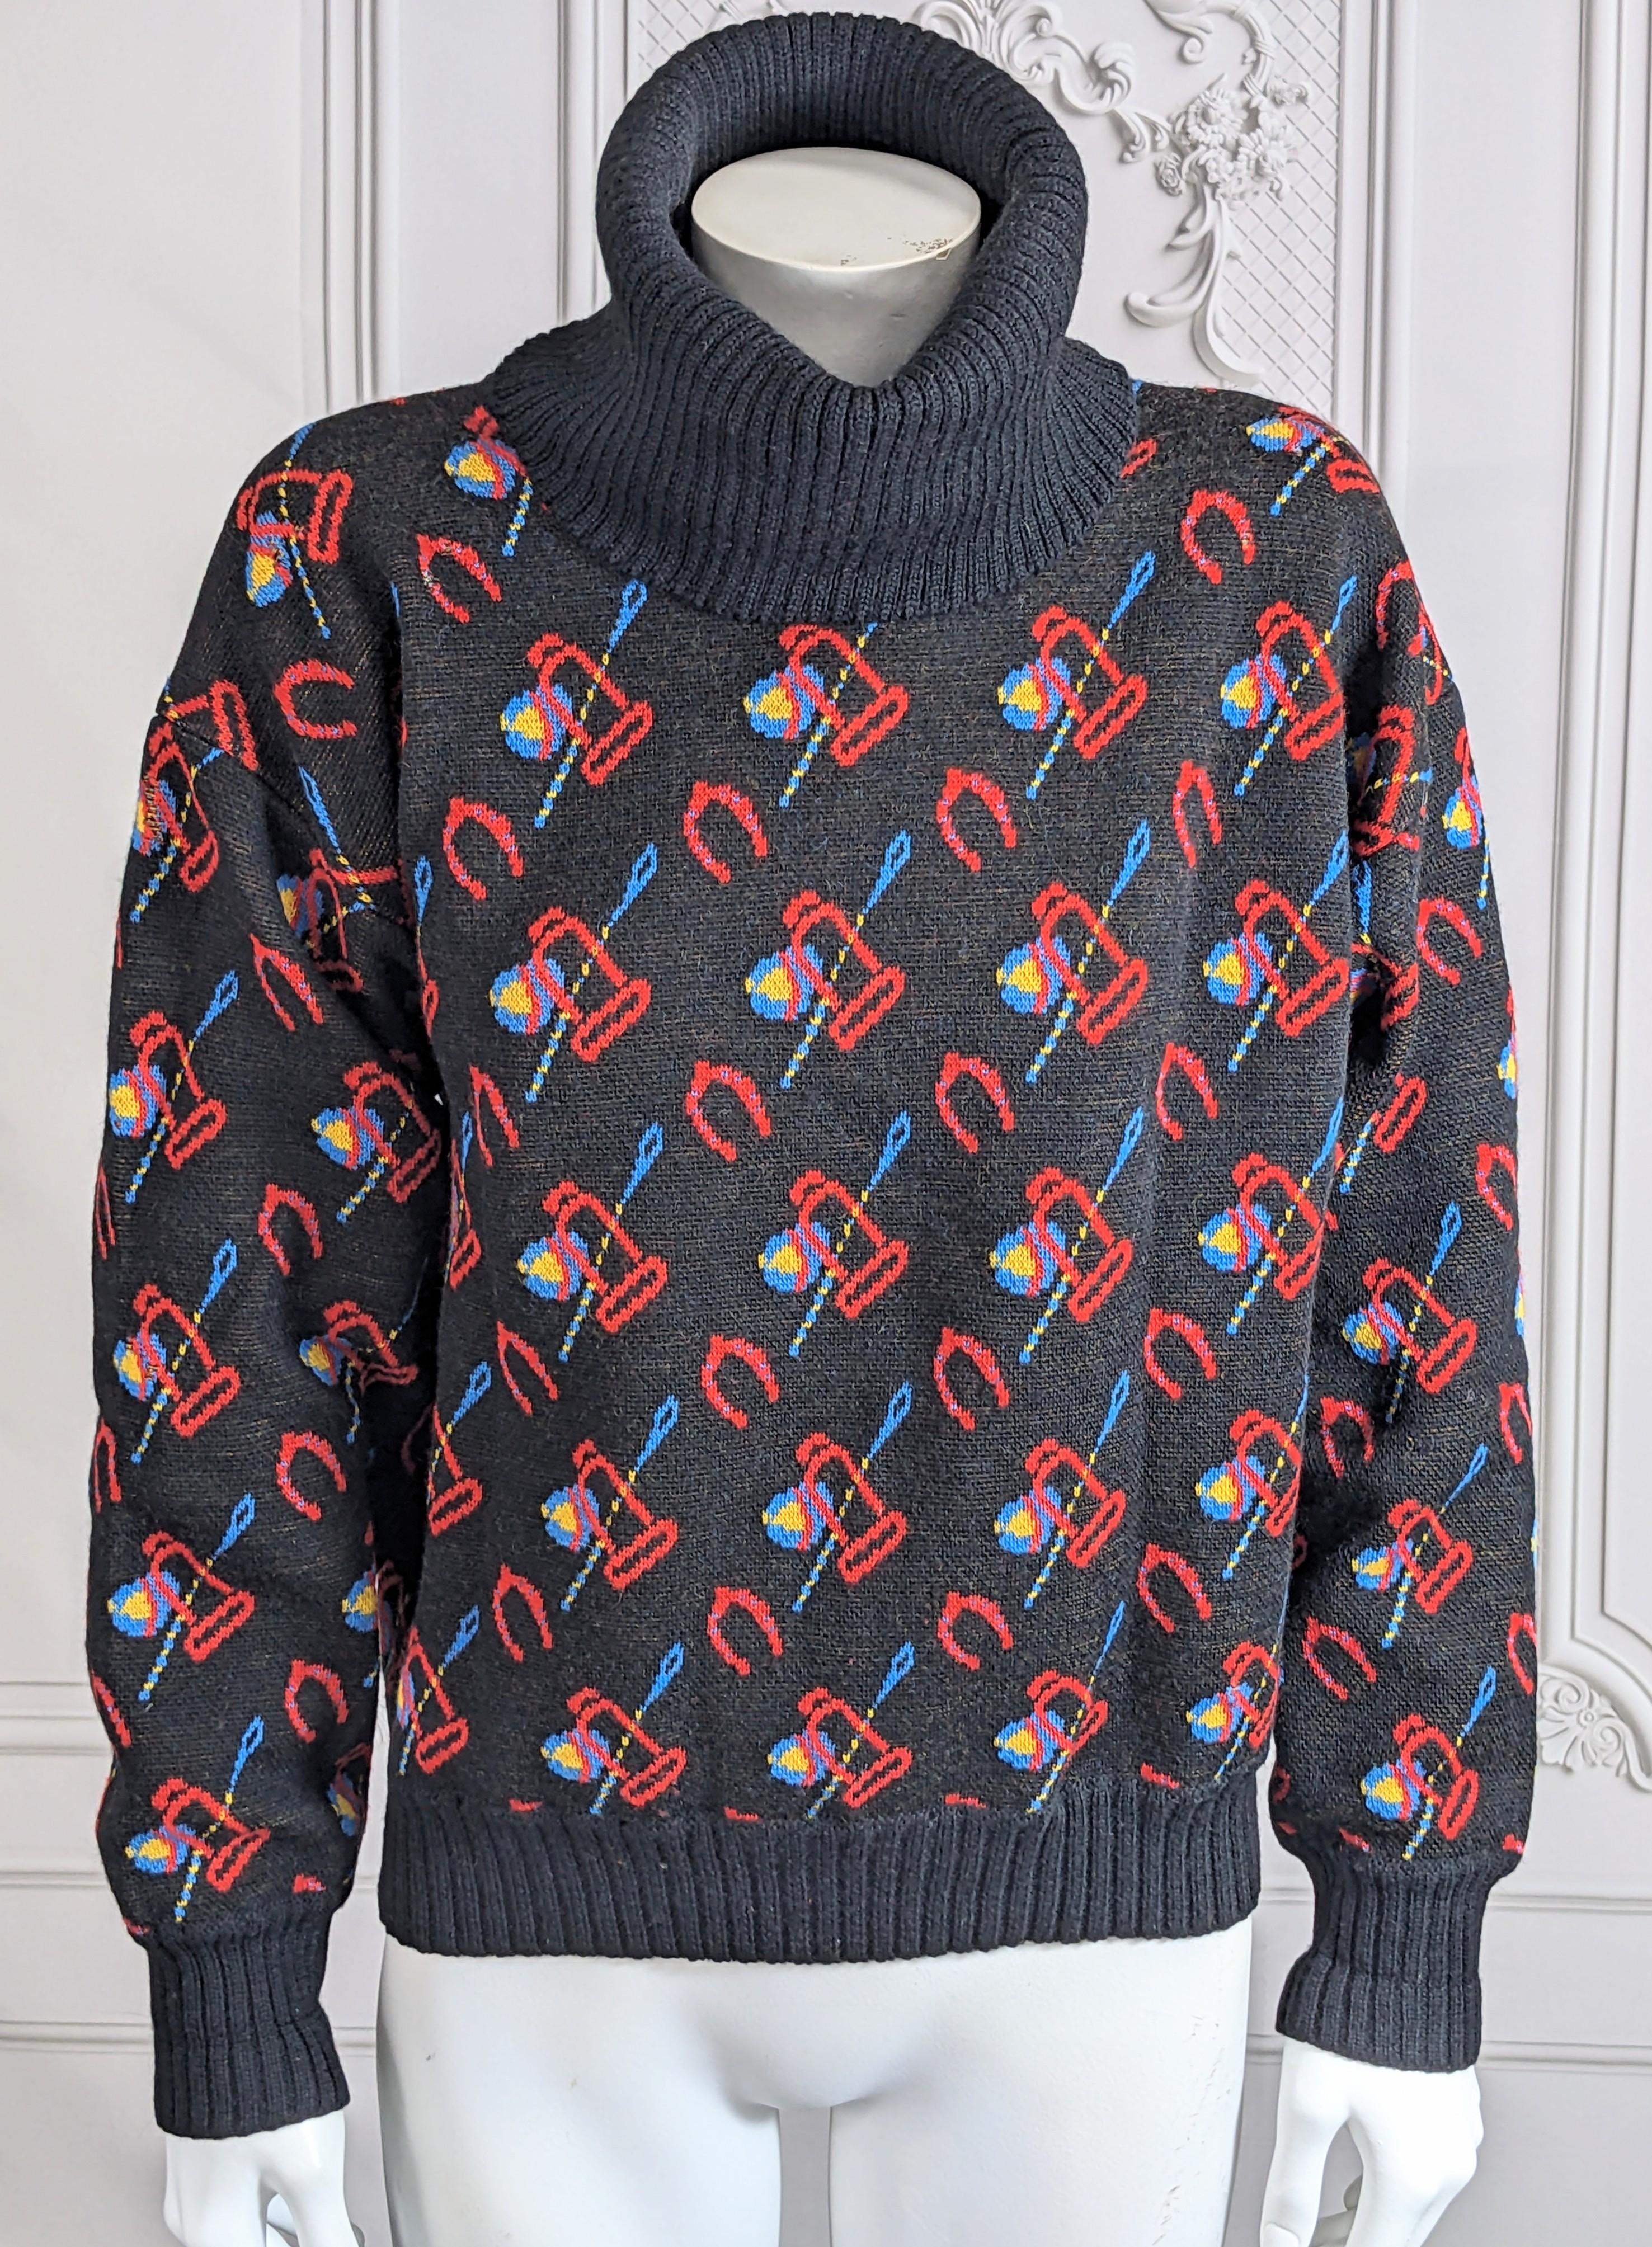 Women's or Men's Gucci Colorful Riding Motif Sweater For Sale